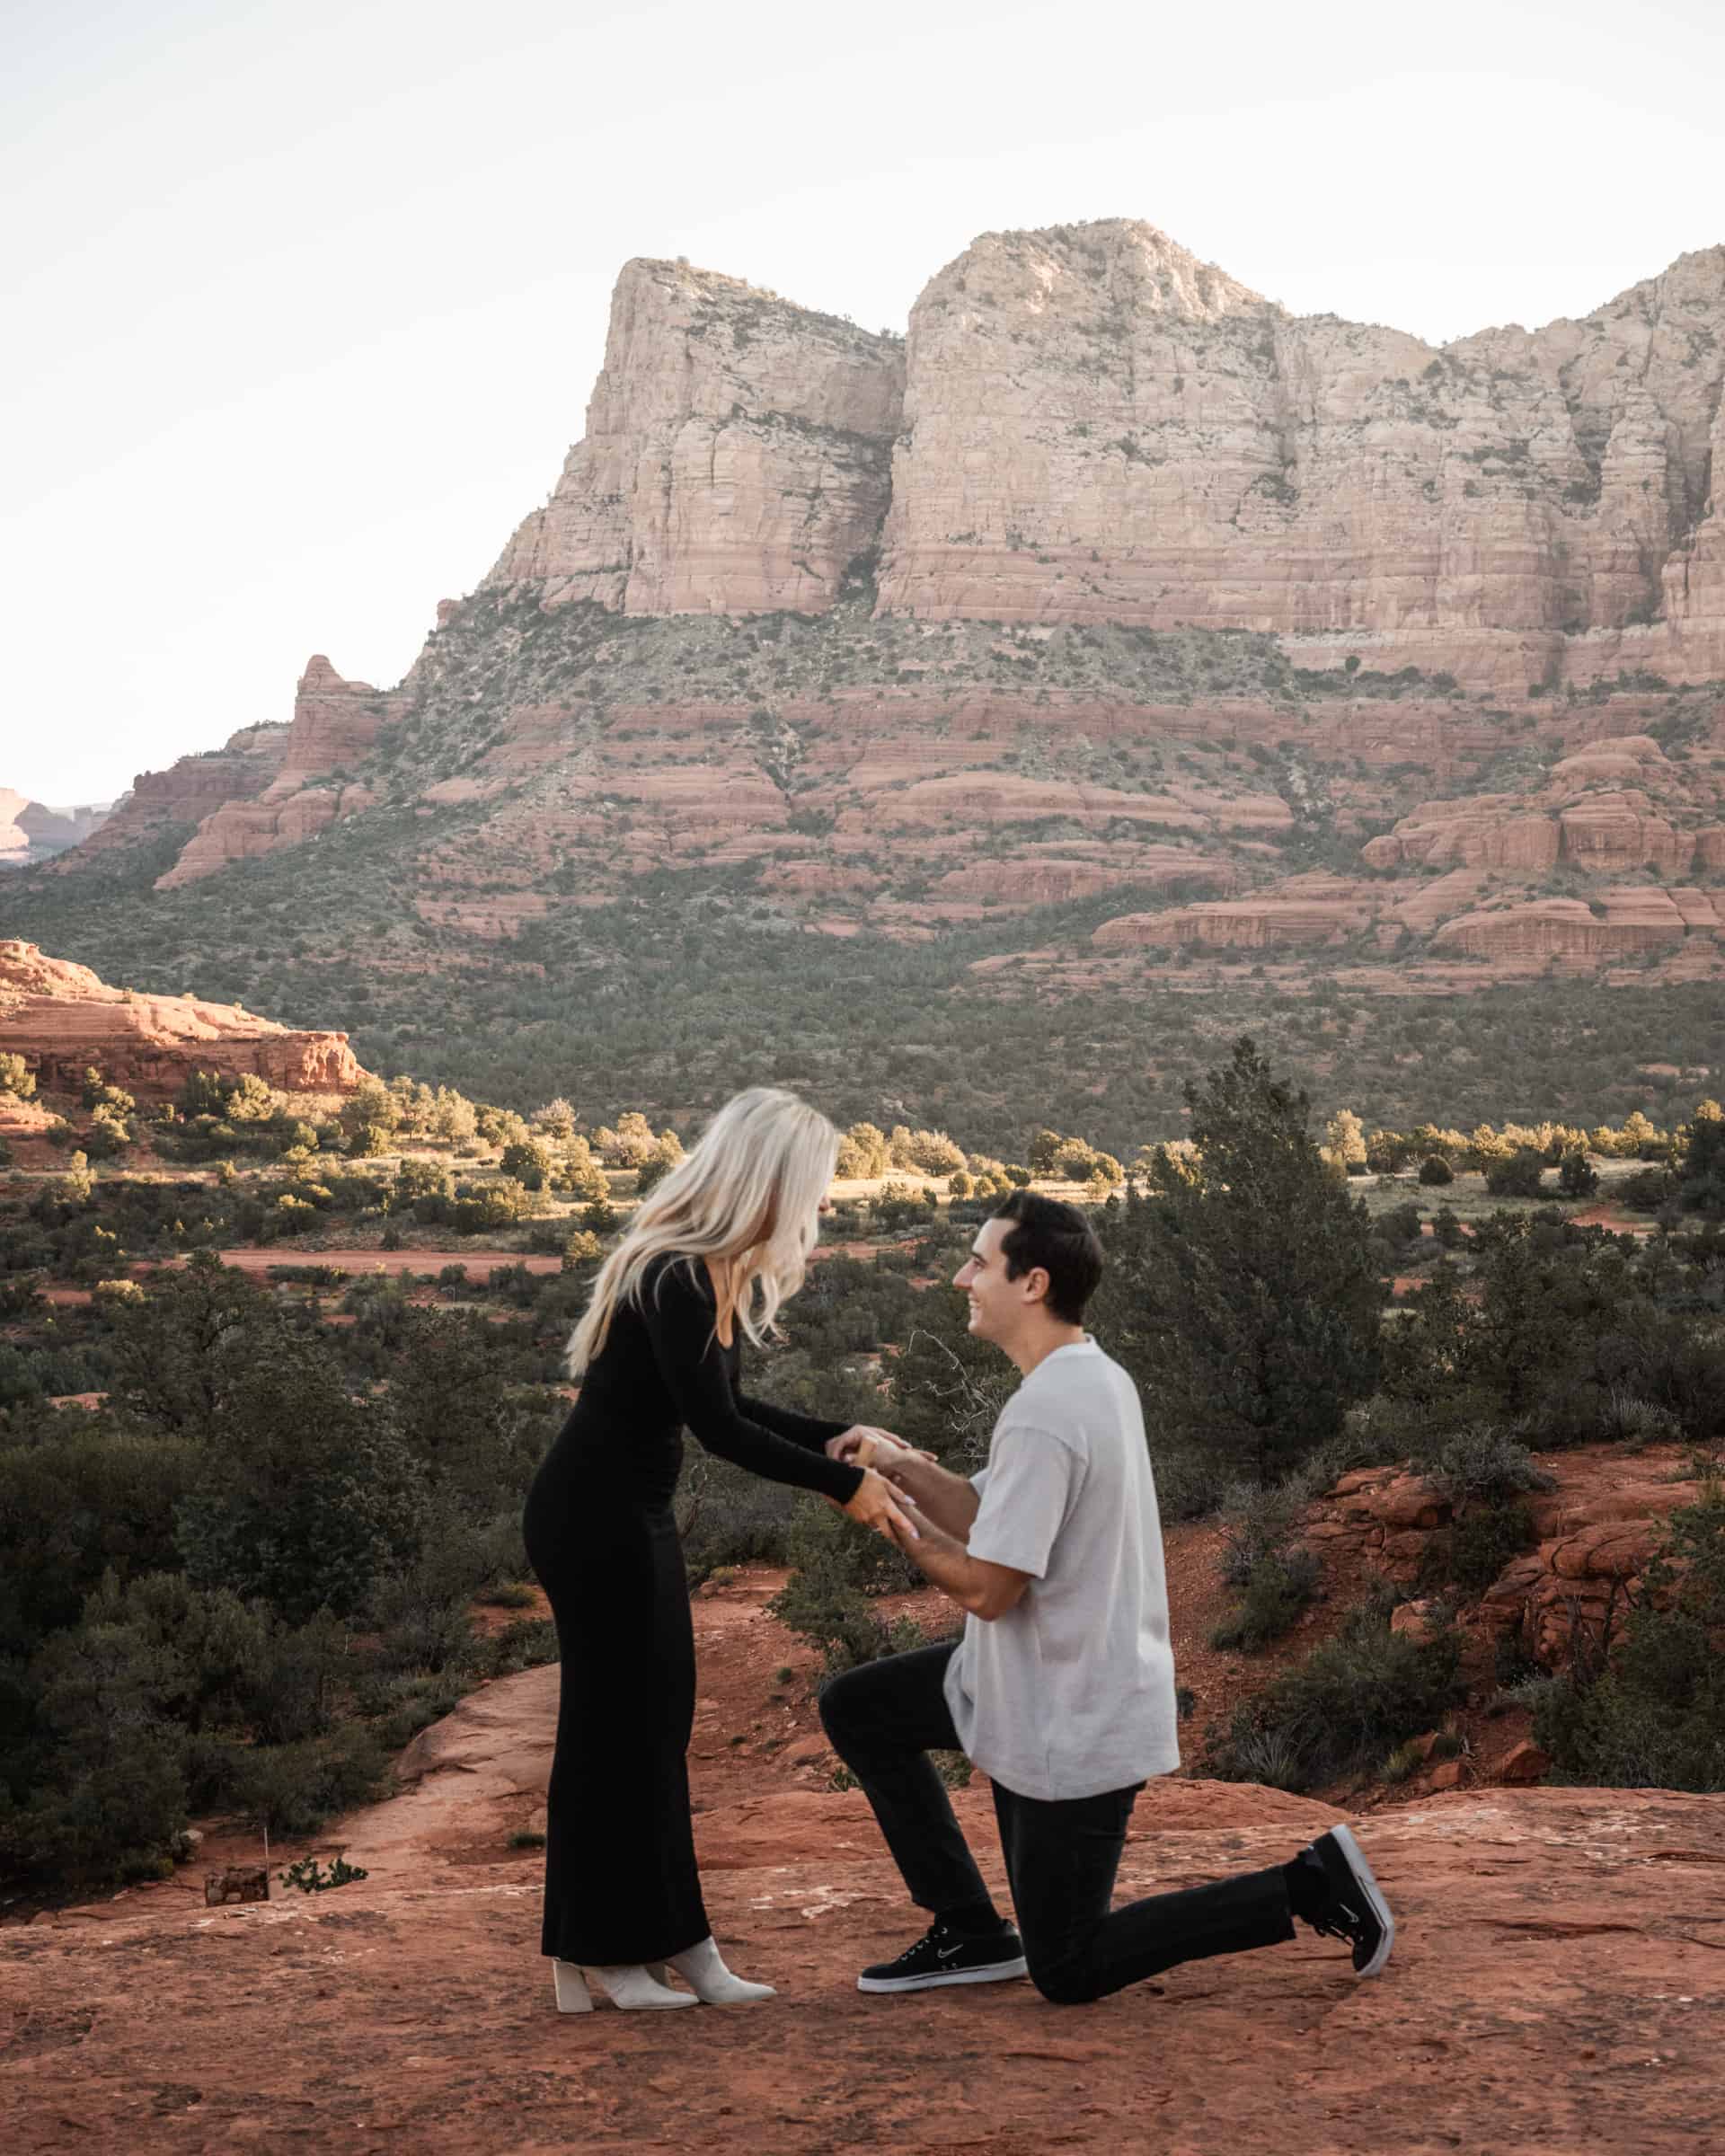 couple proposing to each other, the guy is on his knee and the girl is surprised. there's an epic sedona mountain in the background